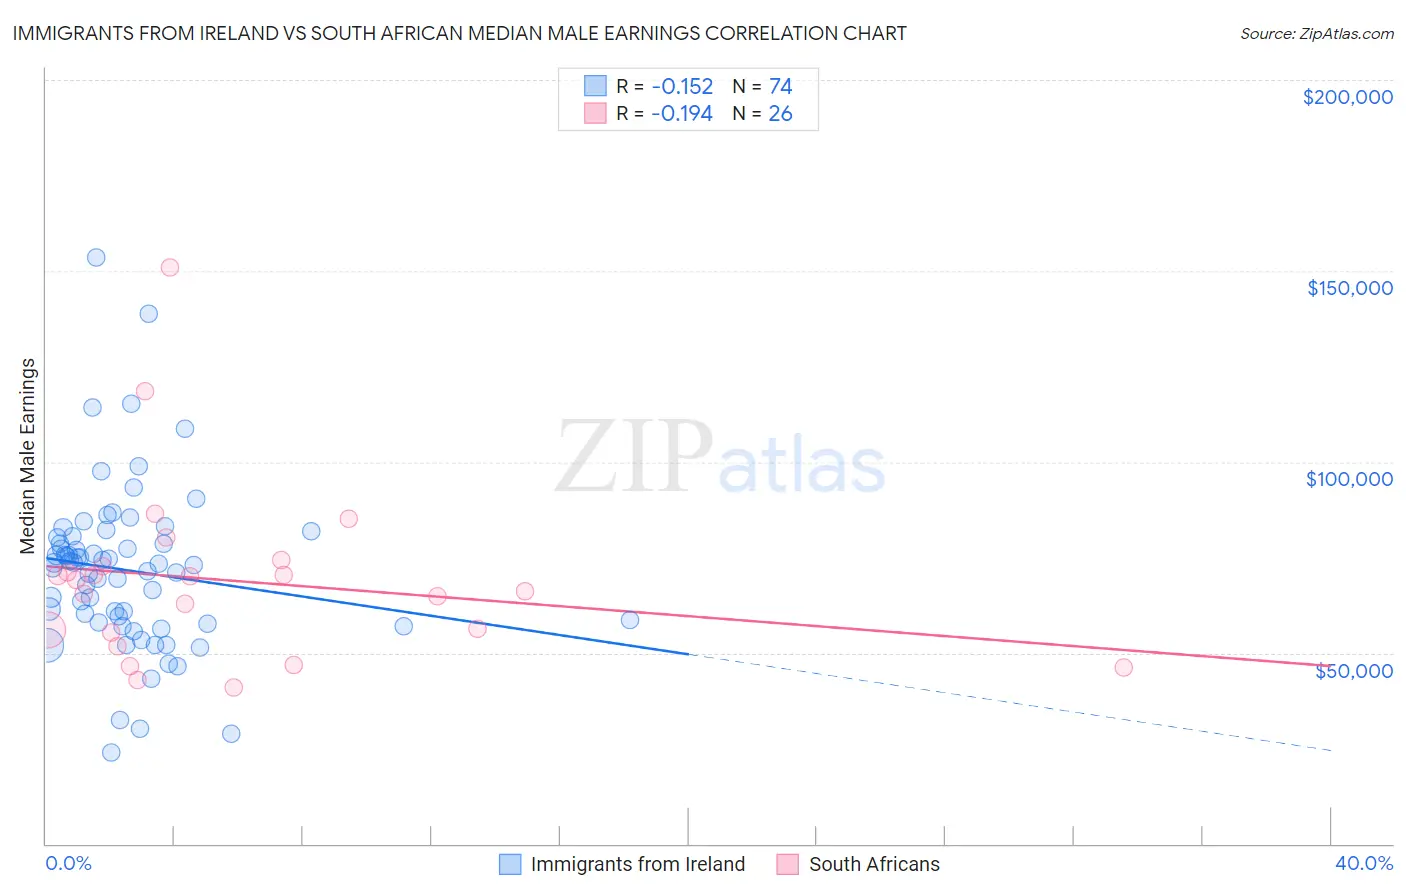 Immigrants from Ireland vs South African Median Male Earnings